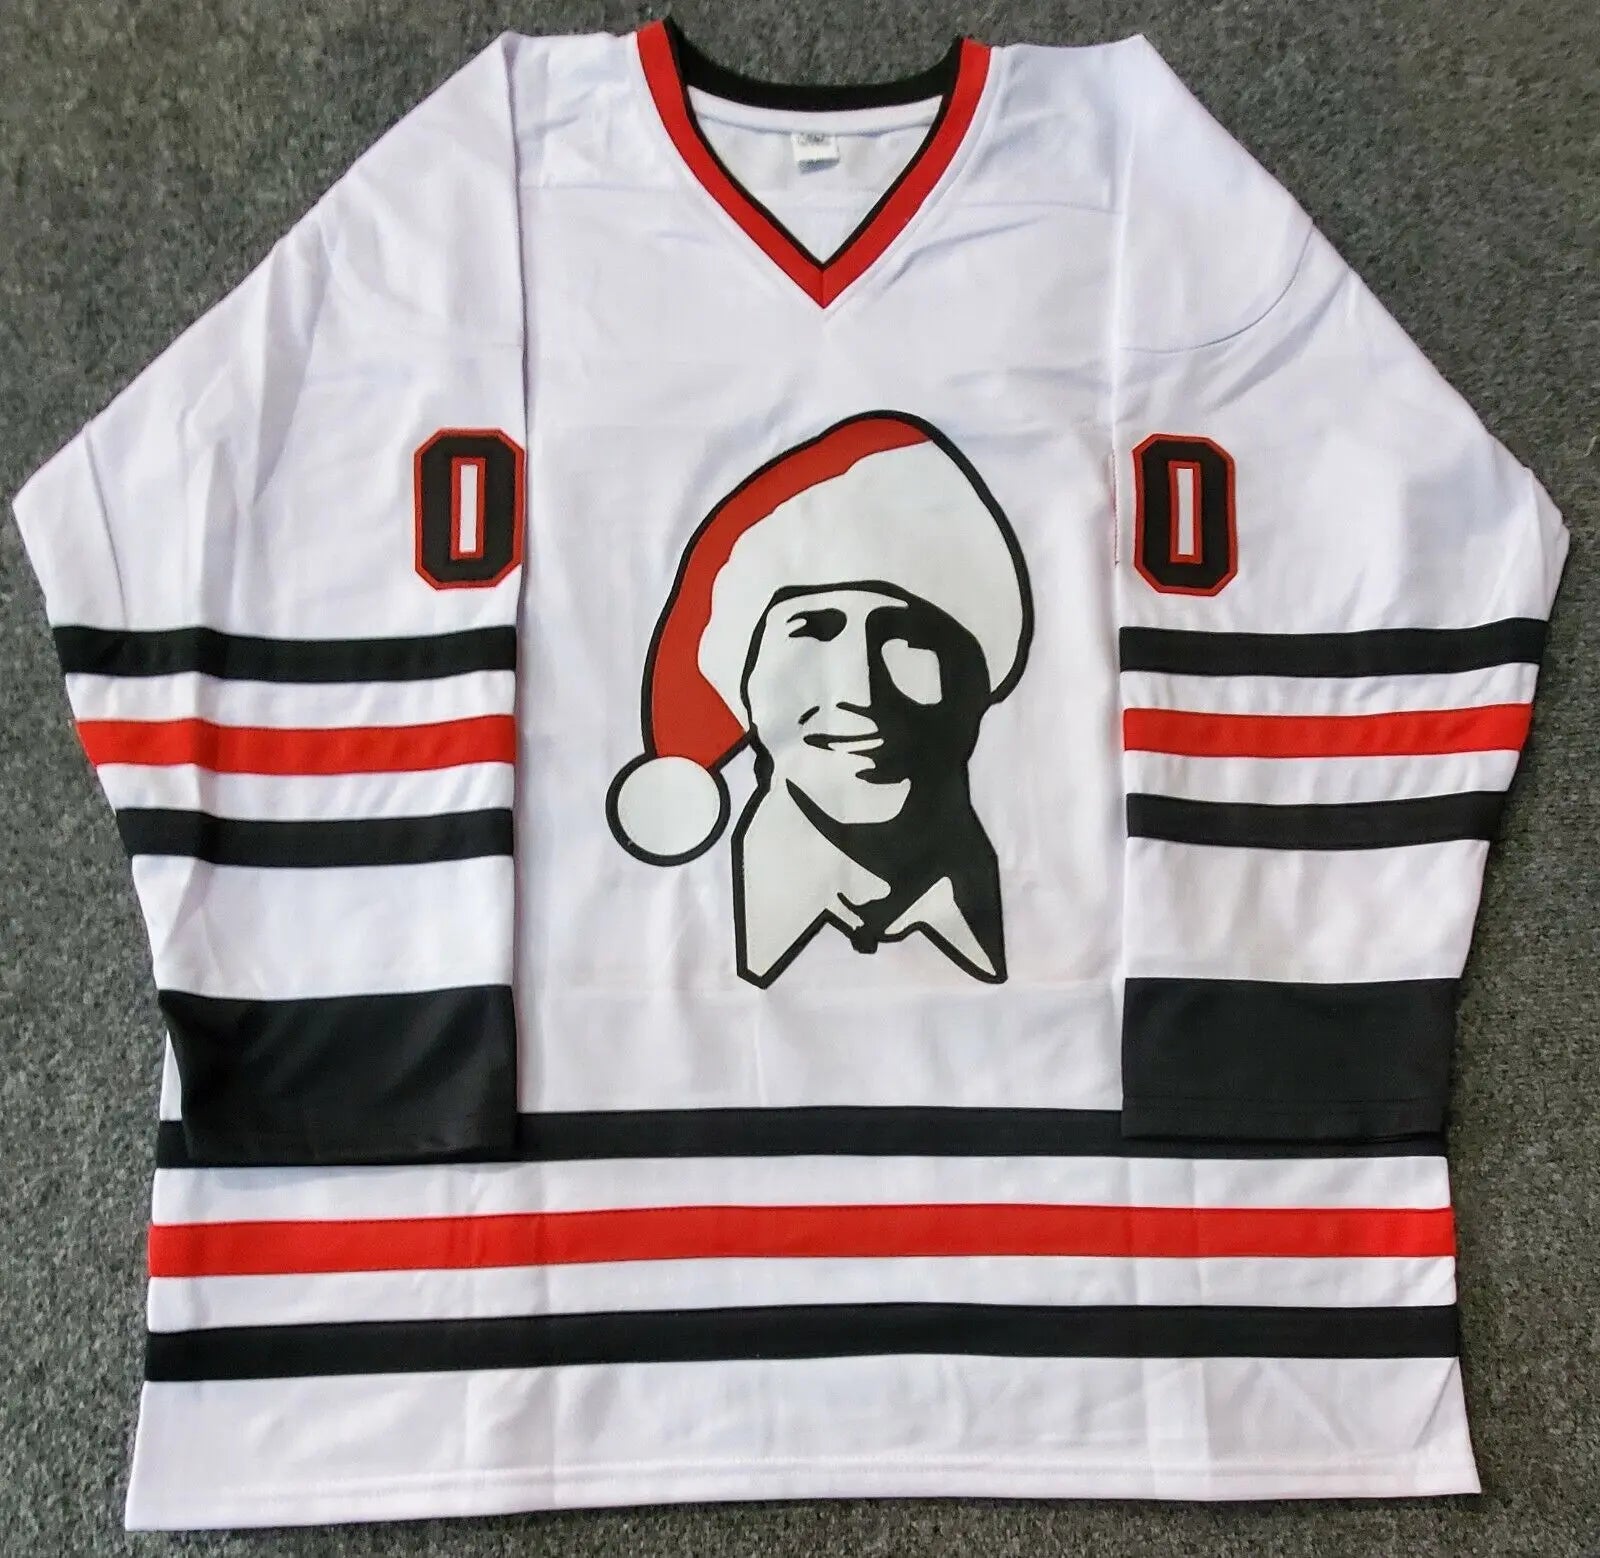 Chevy Chase Signed Jersey (Beckett)